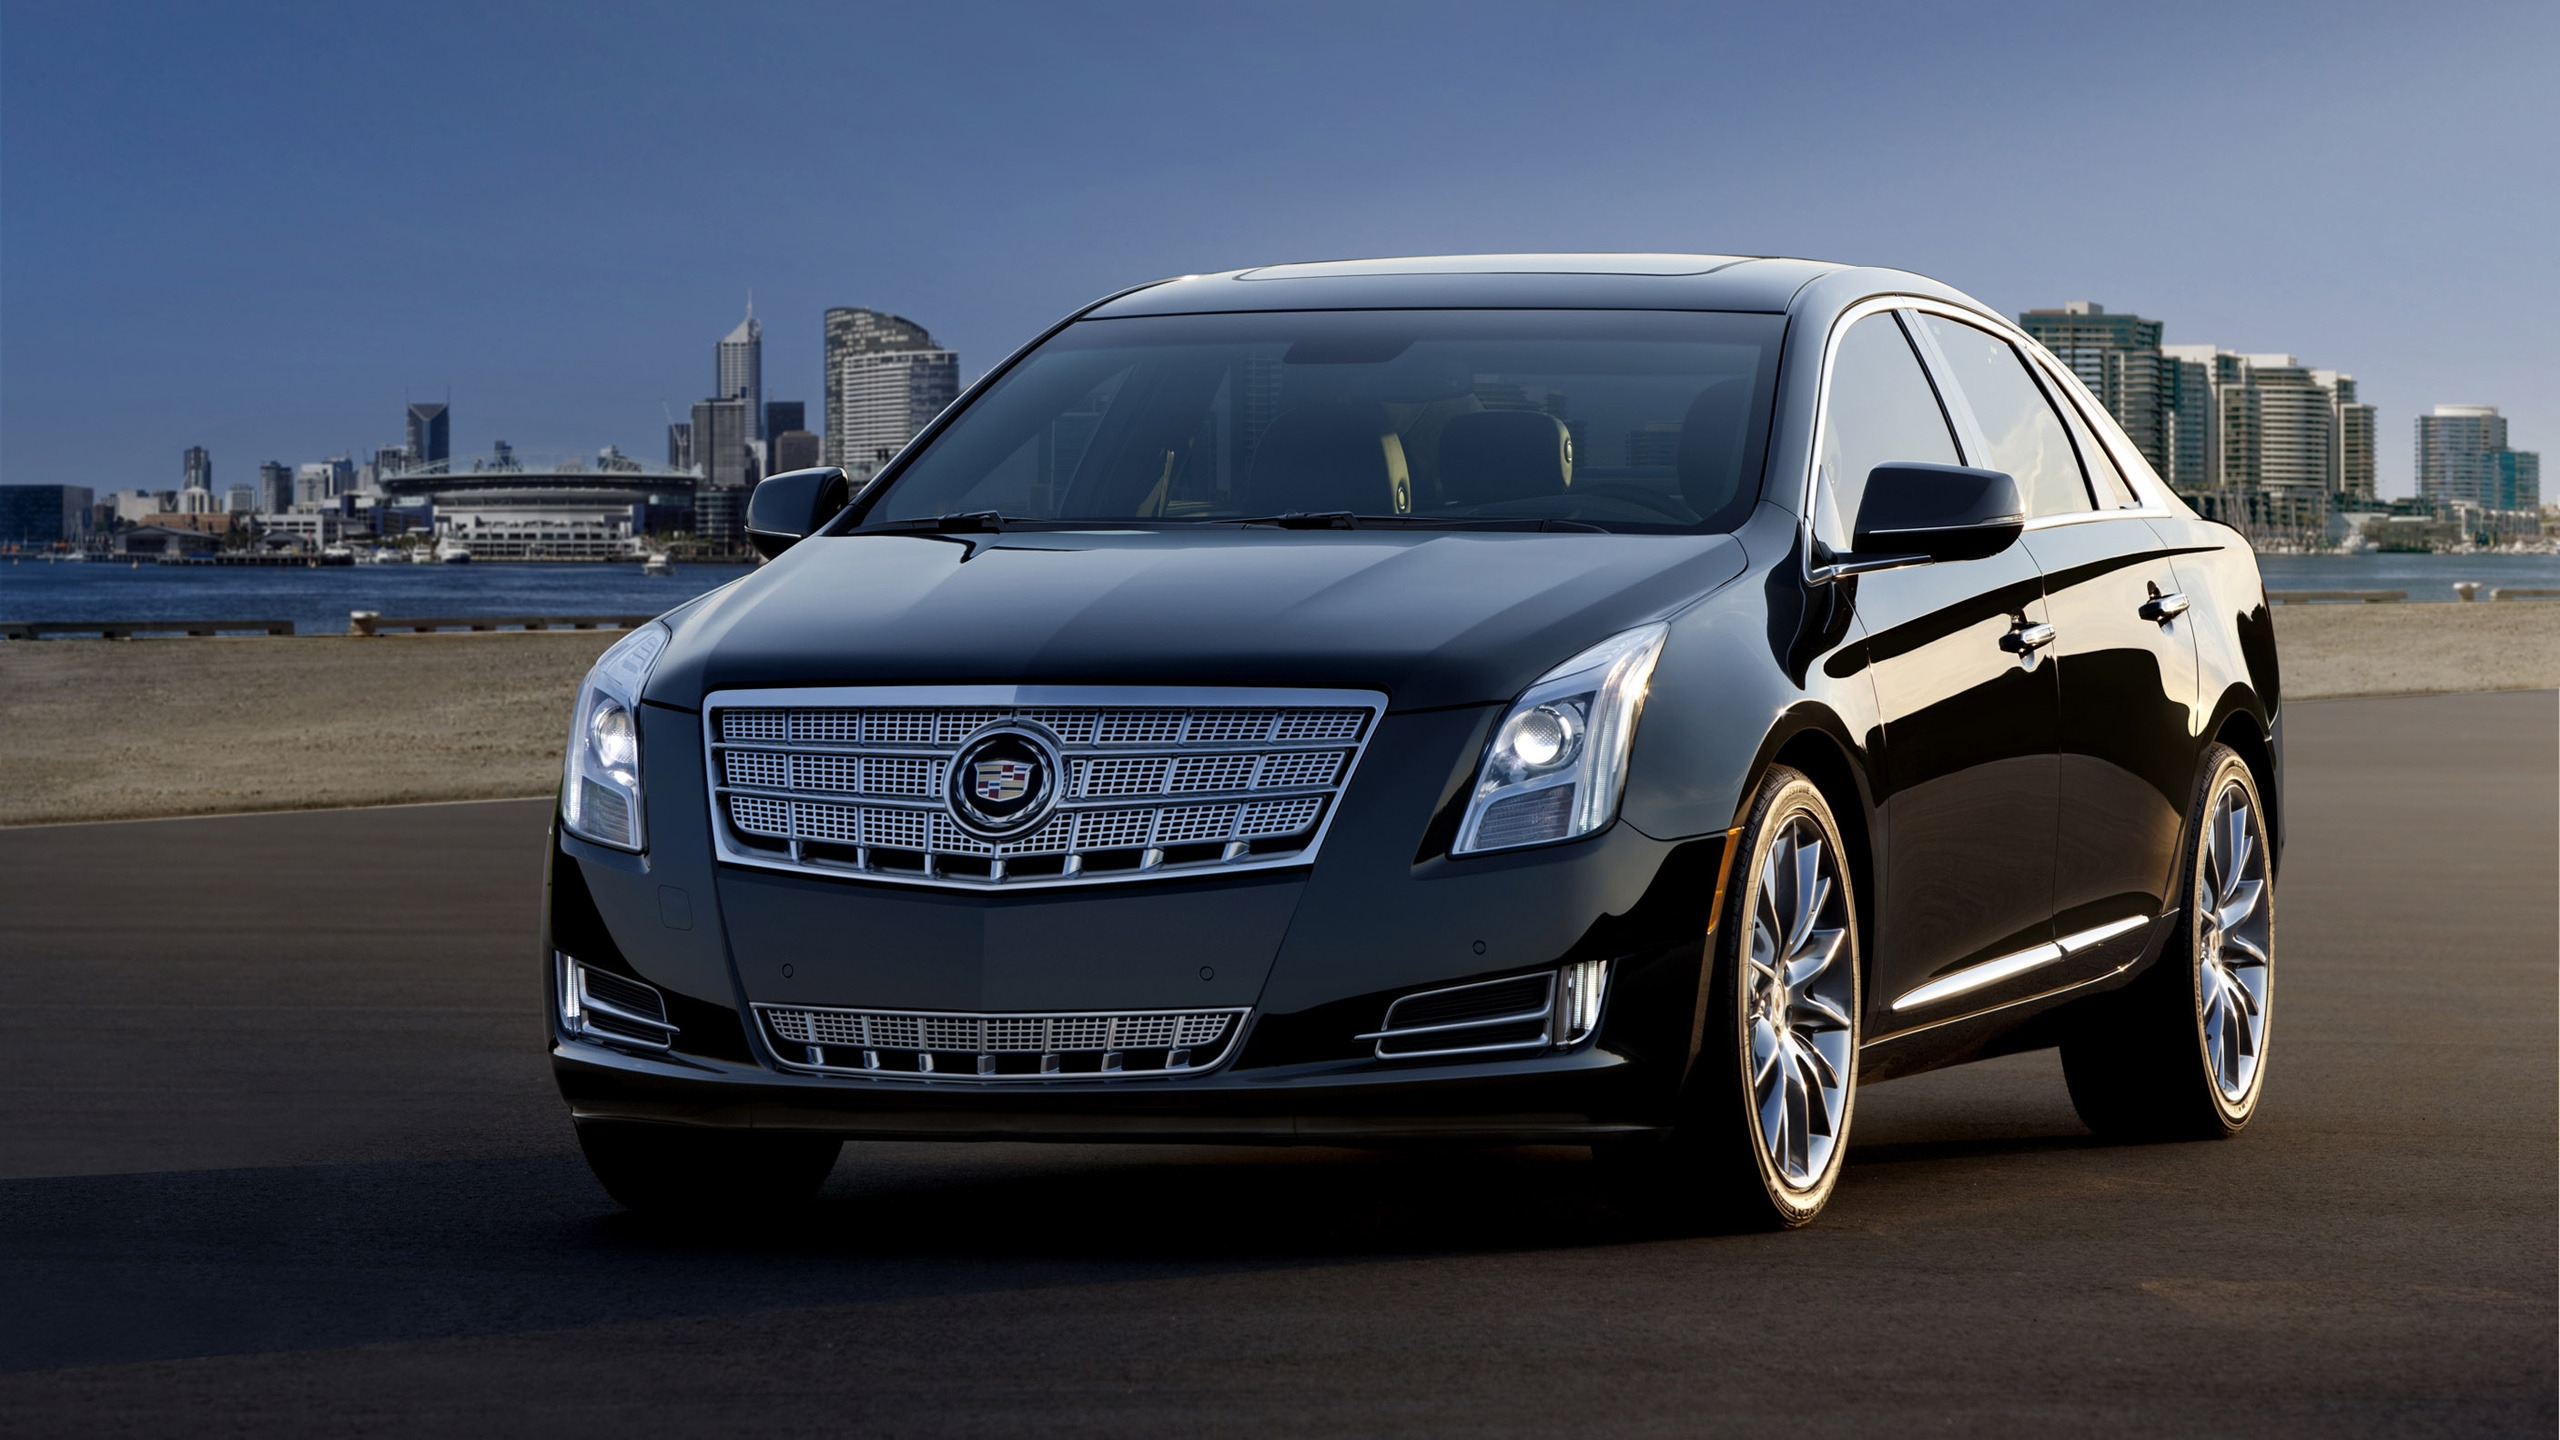 2013 Cadillac XTS for 2560x1440 HDTV resolution